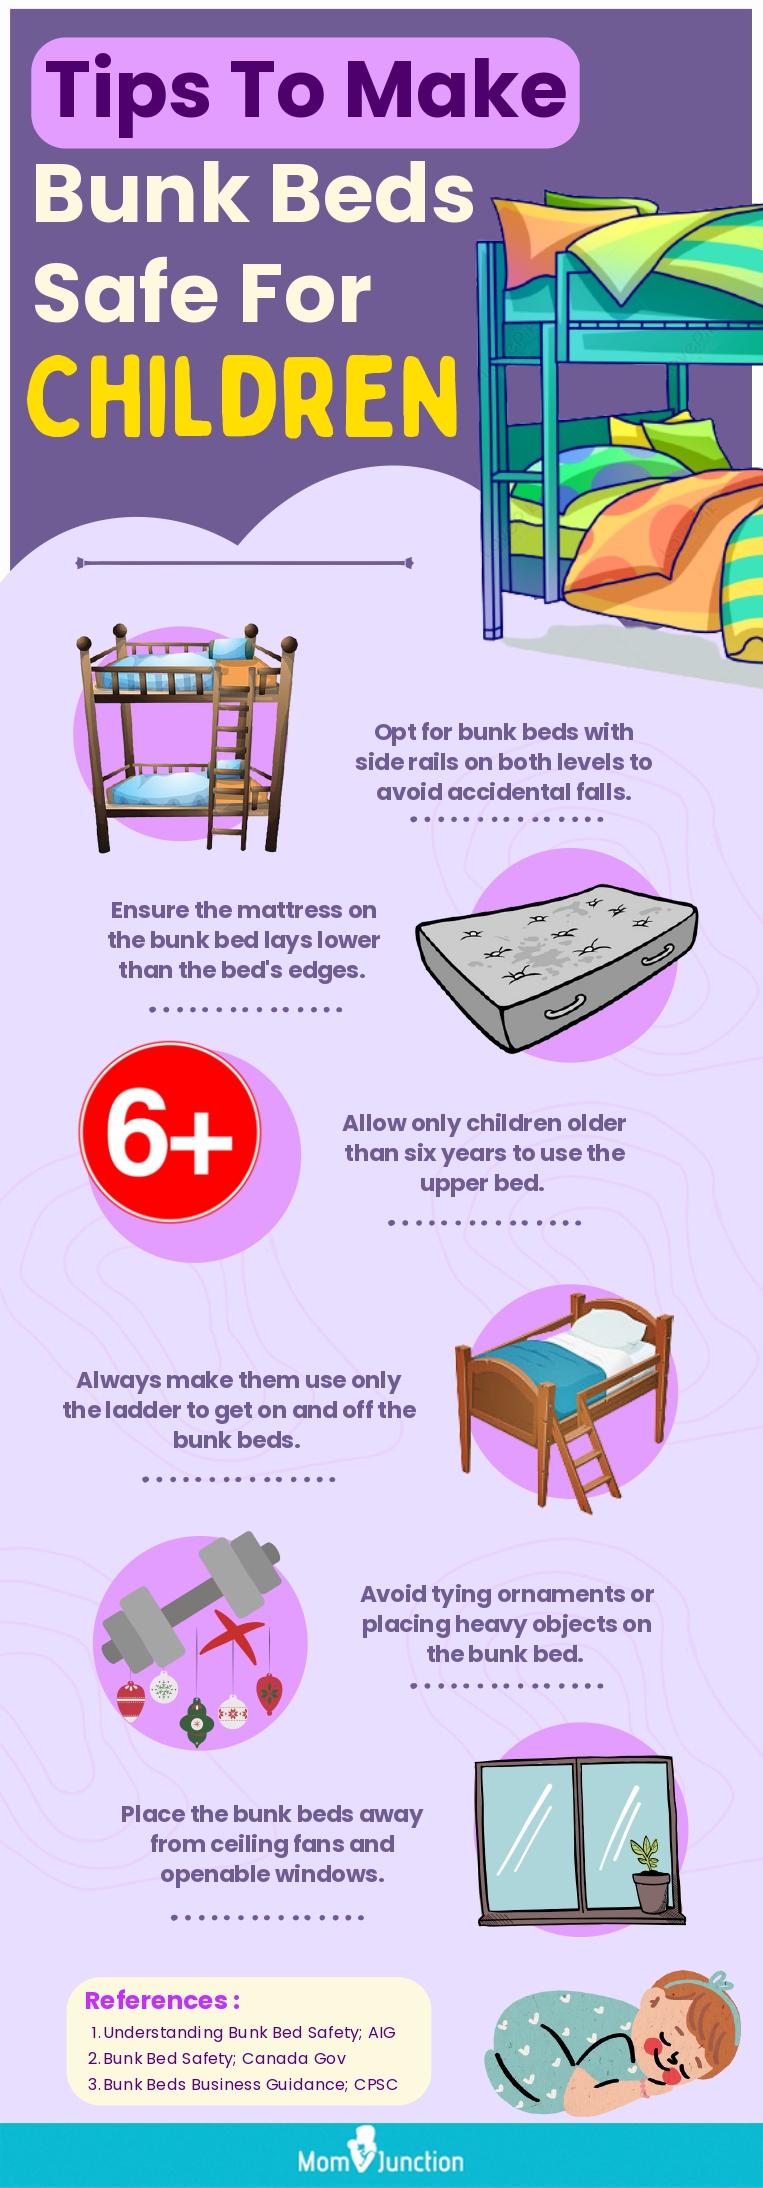 Tips To Make Bunk Beds Safe For Children (infographic)